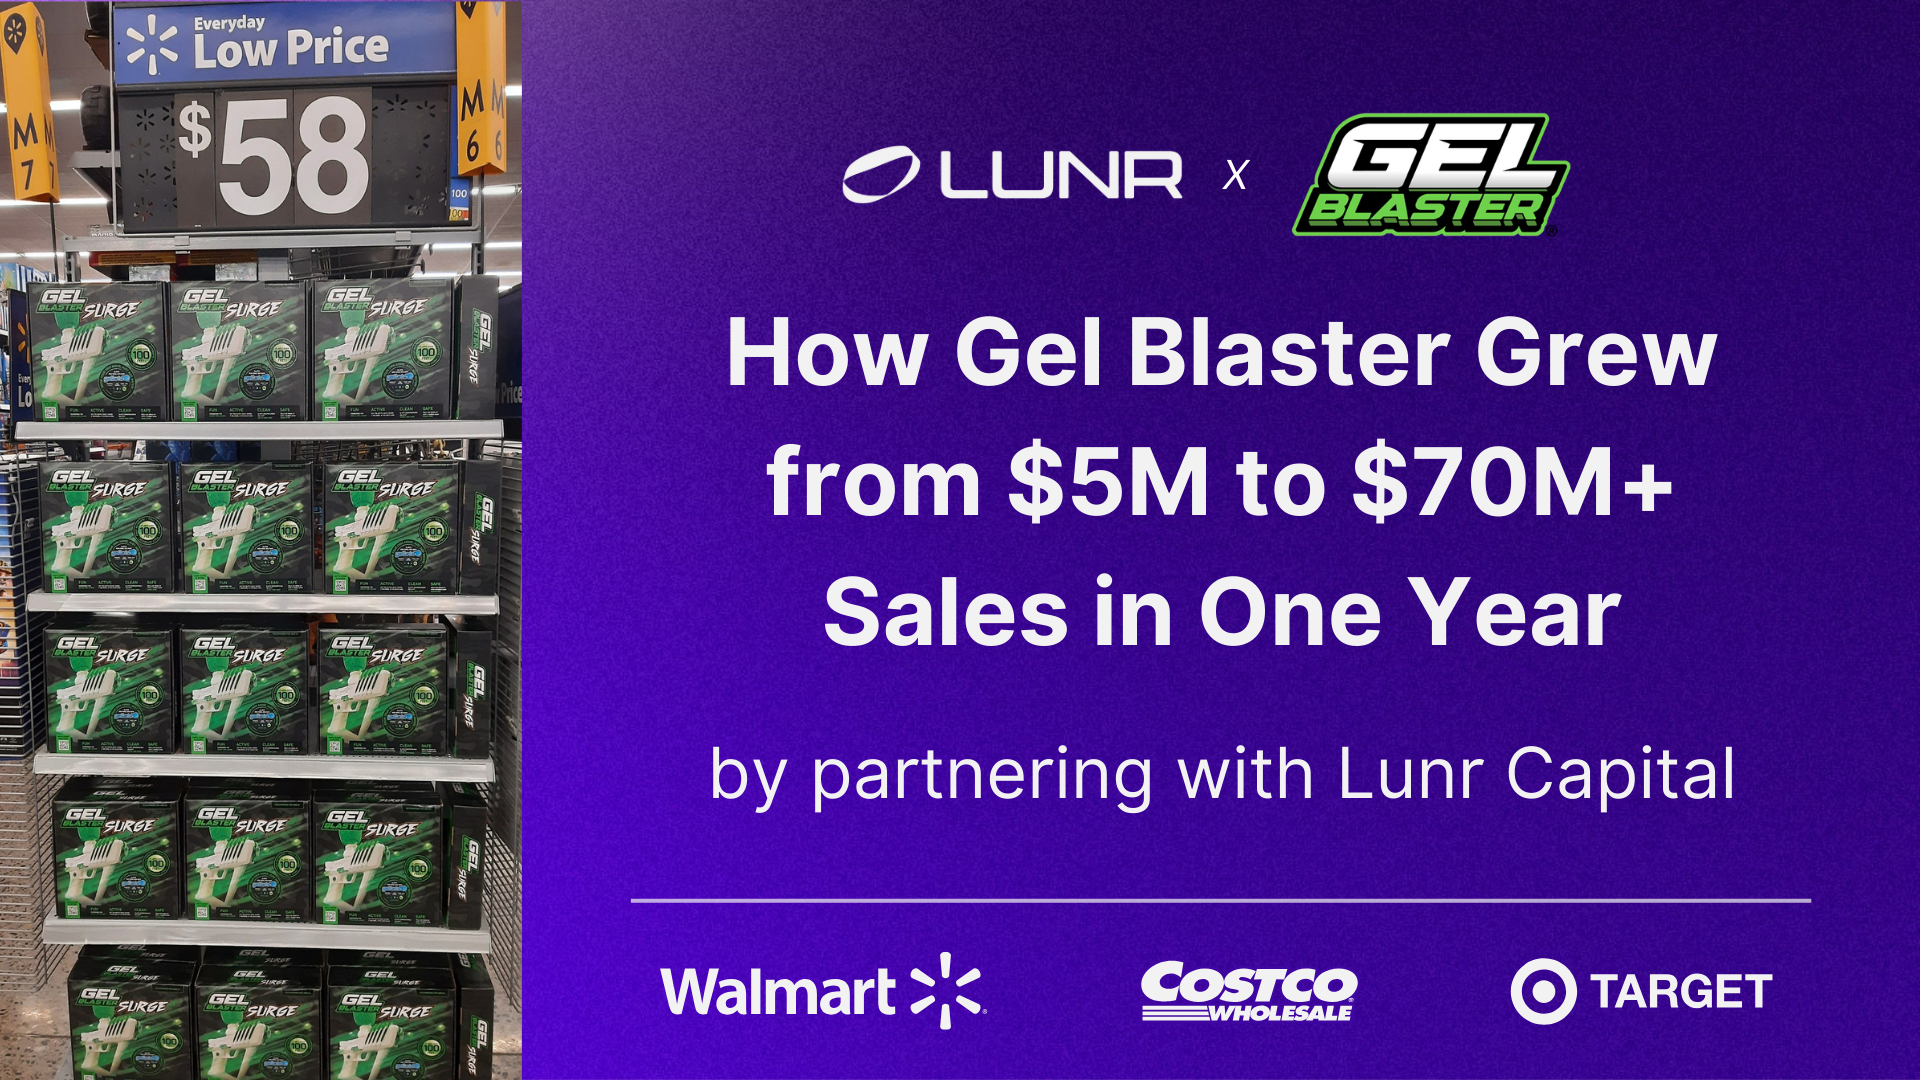 Cover Image showing the words: How Gel Blaster Grew from $5M to $70M+ sales in one year by partnering with Lunr.